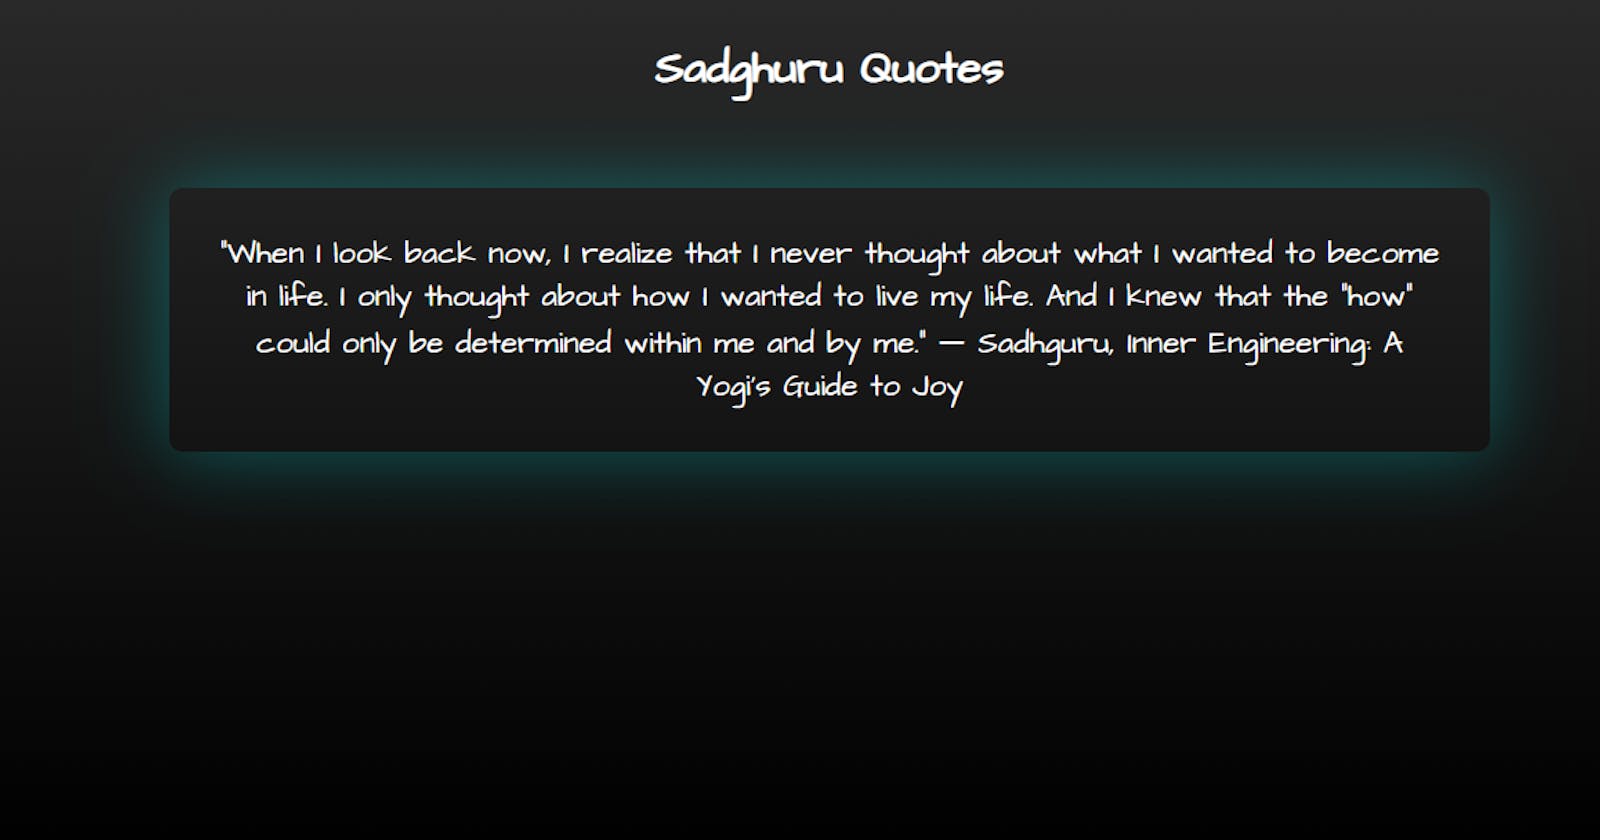 Sadghuru quotes from my puppeteer api